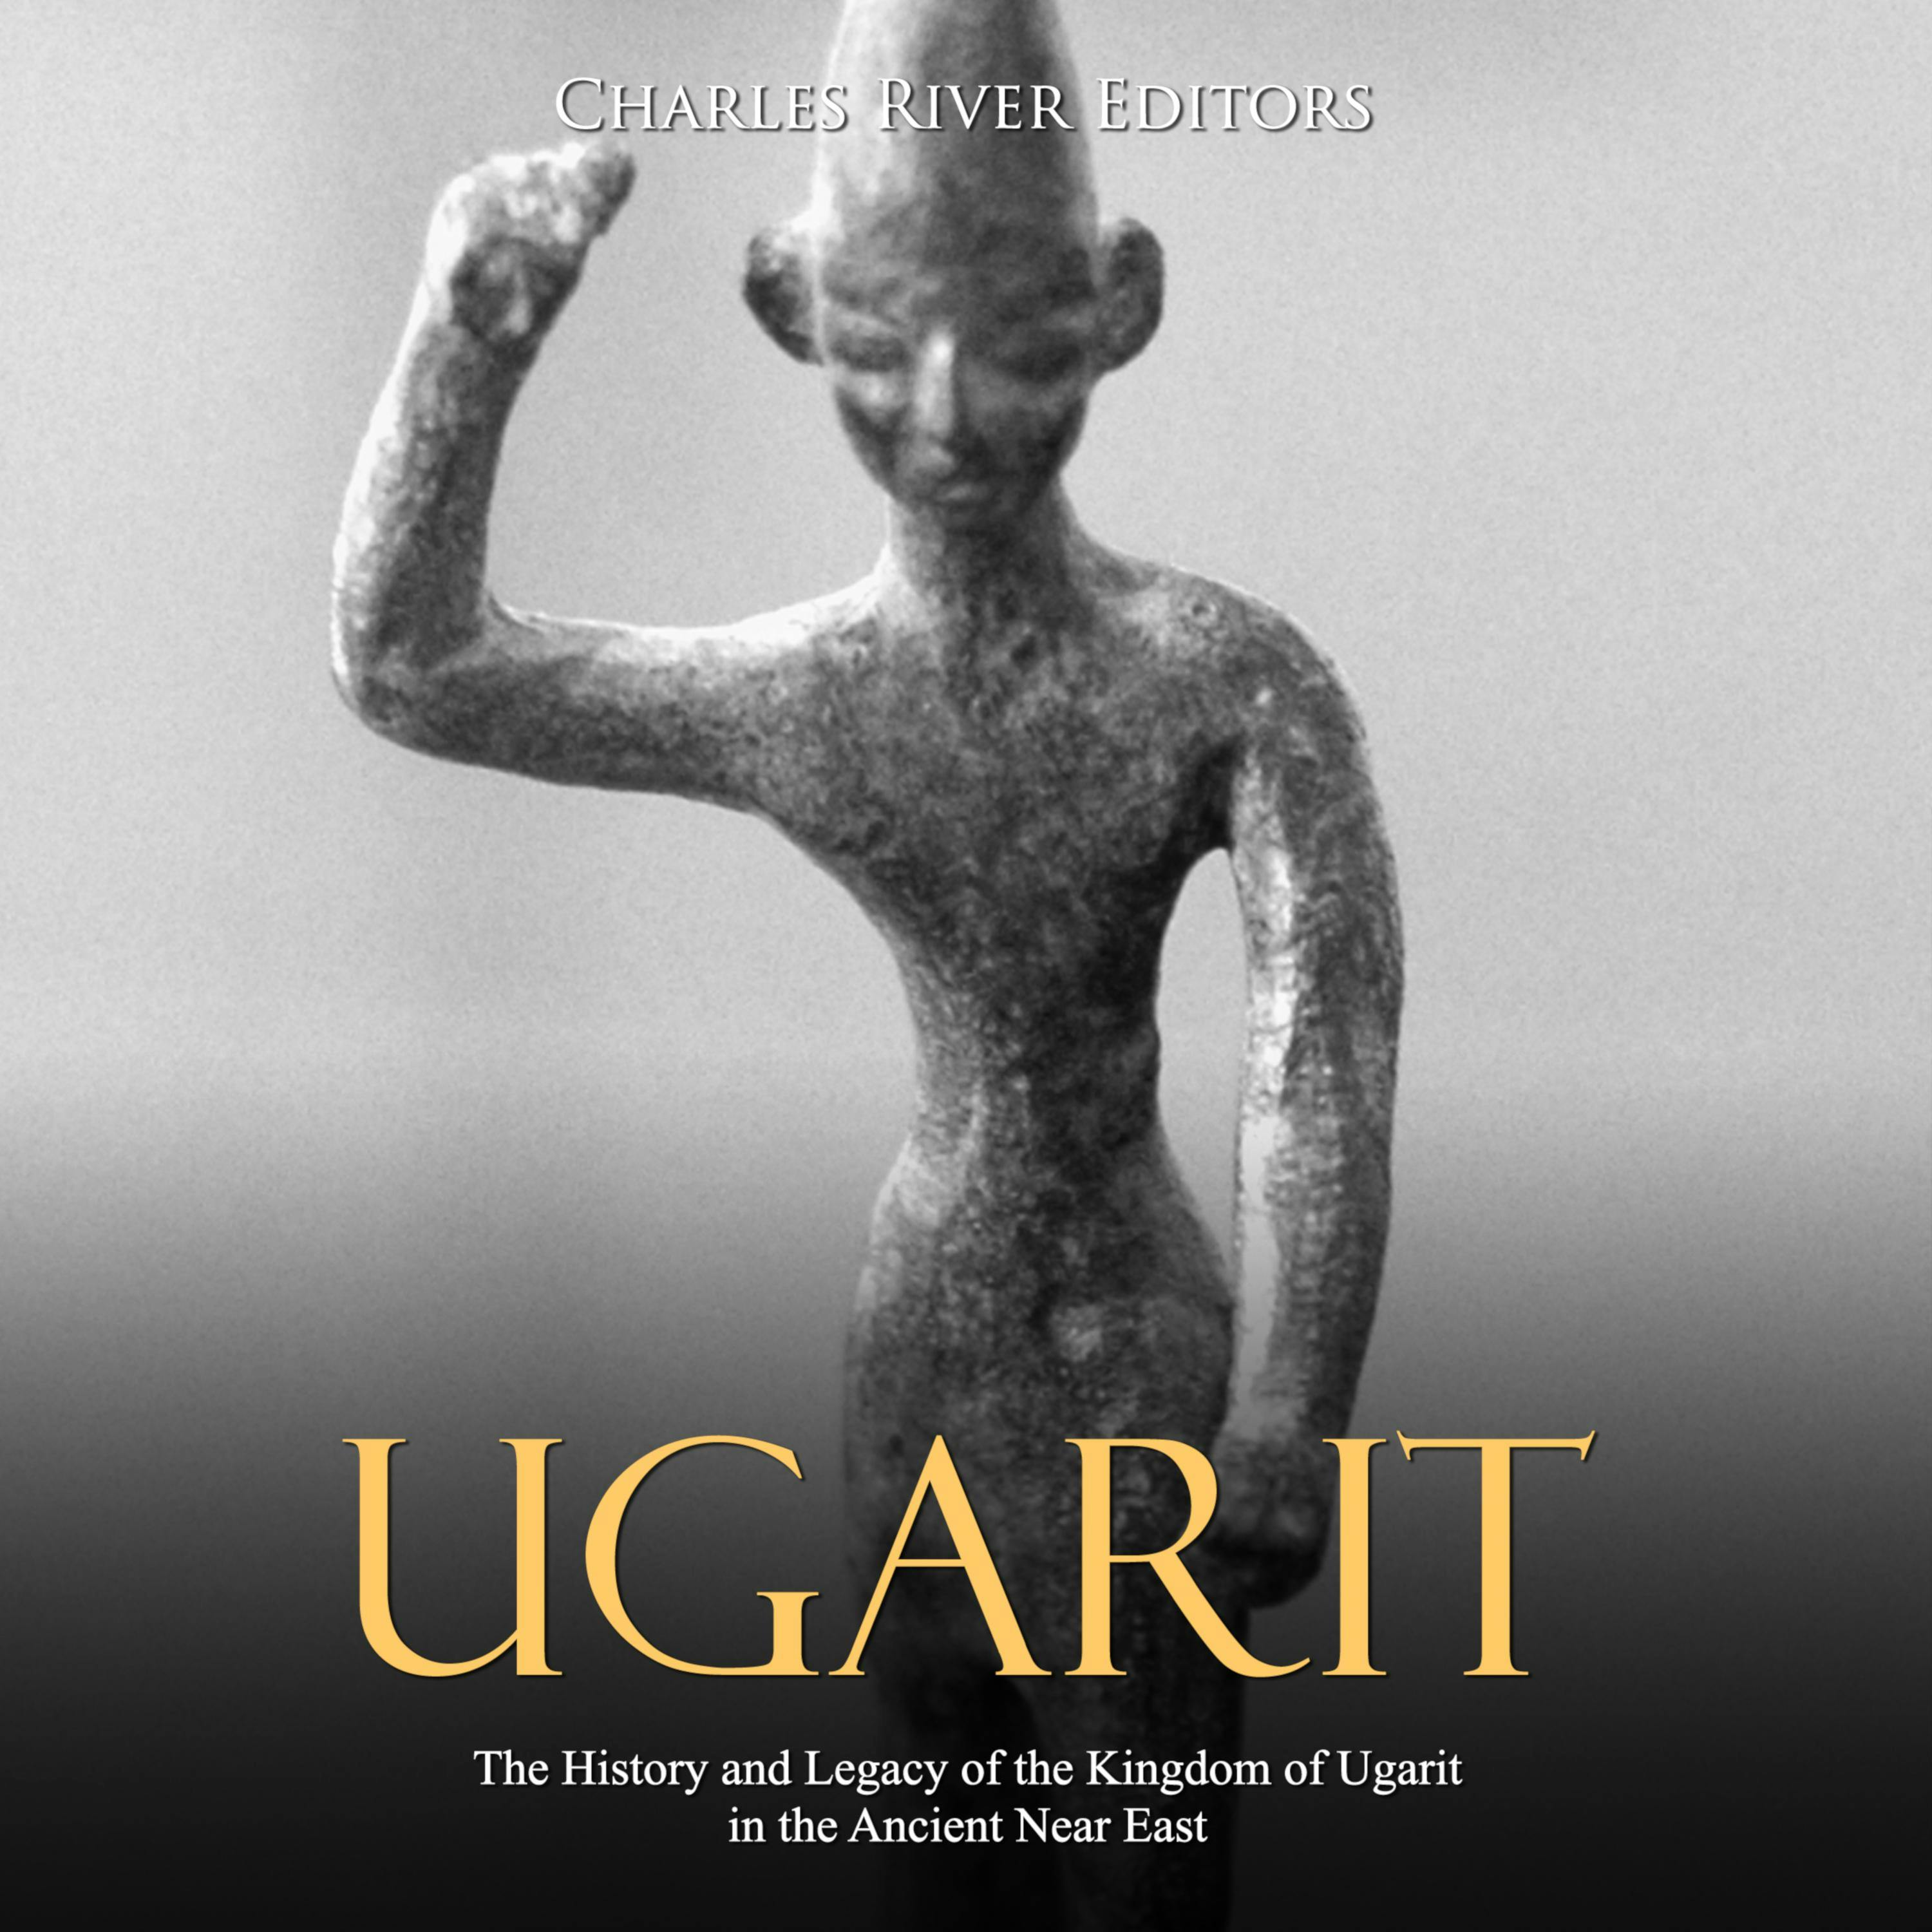 Ugarit: The History and Legacy of the Kingdom of Ugarit in the Ancient Near East - Charles River Editors